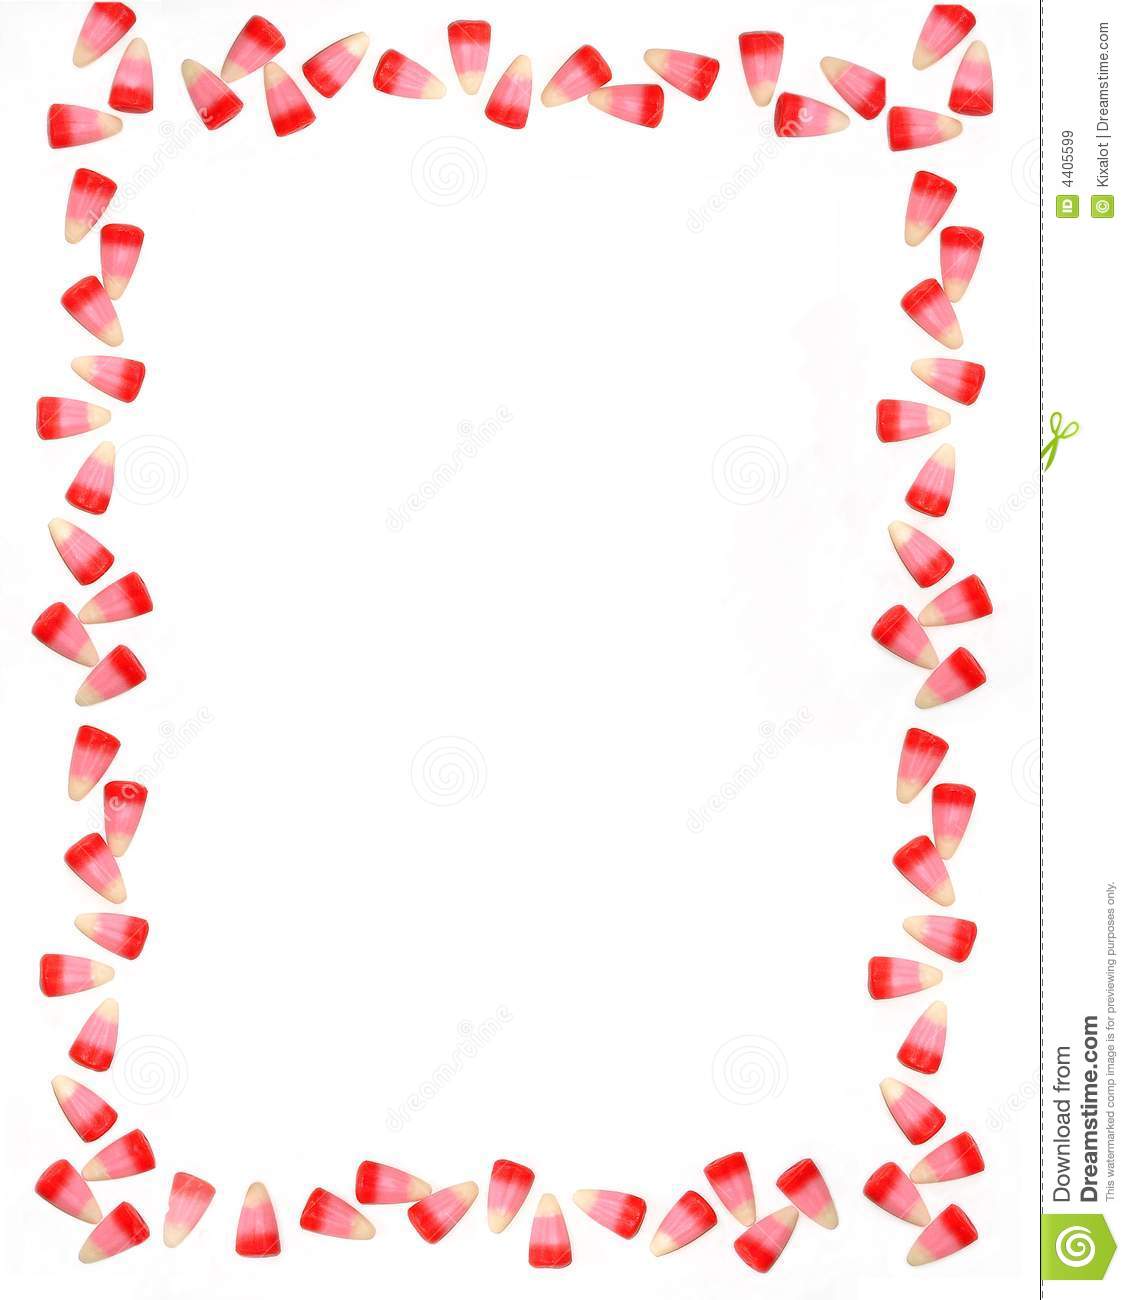 Candy Corn Border Perfect For Valentine S Day  Sweet Candy Frame